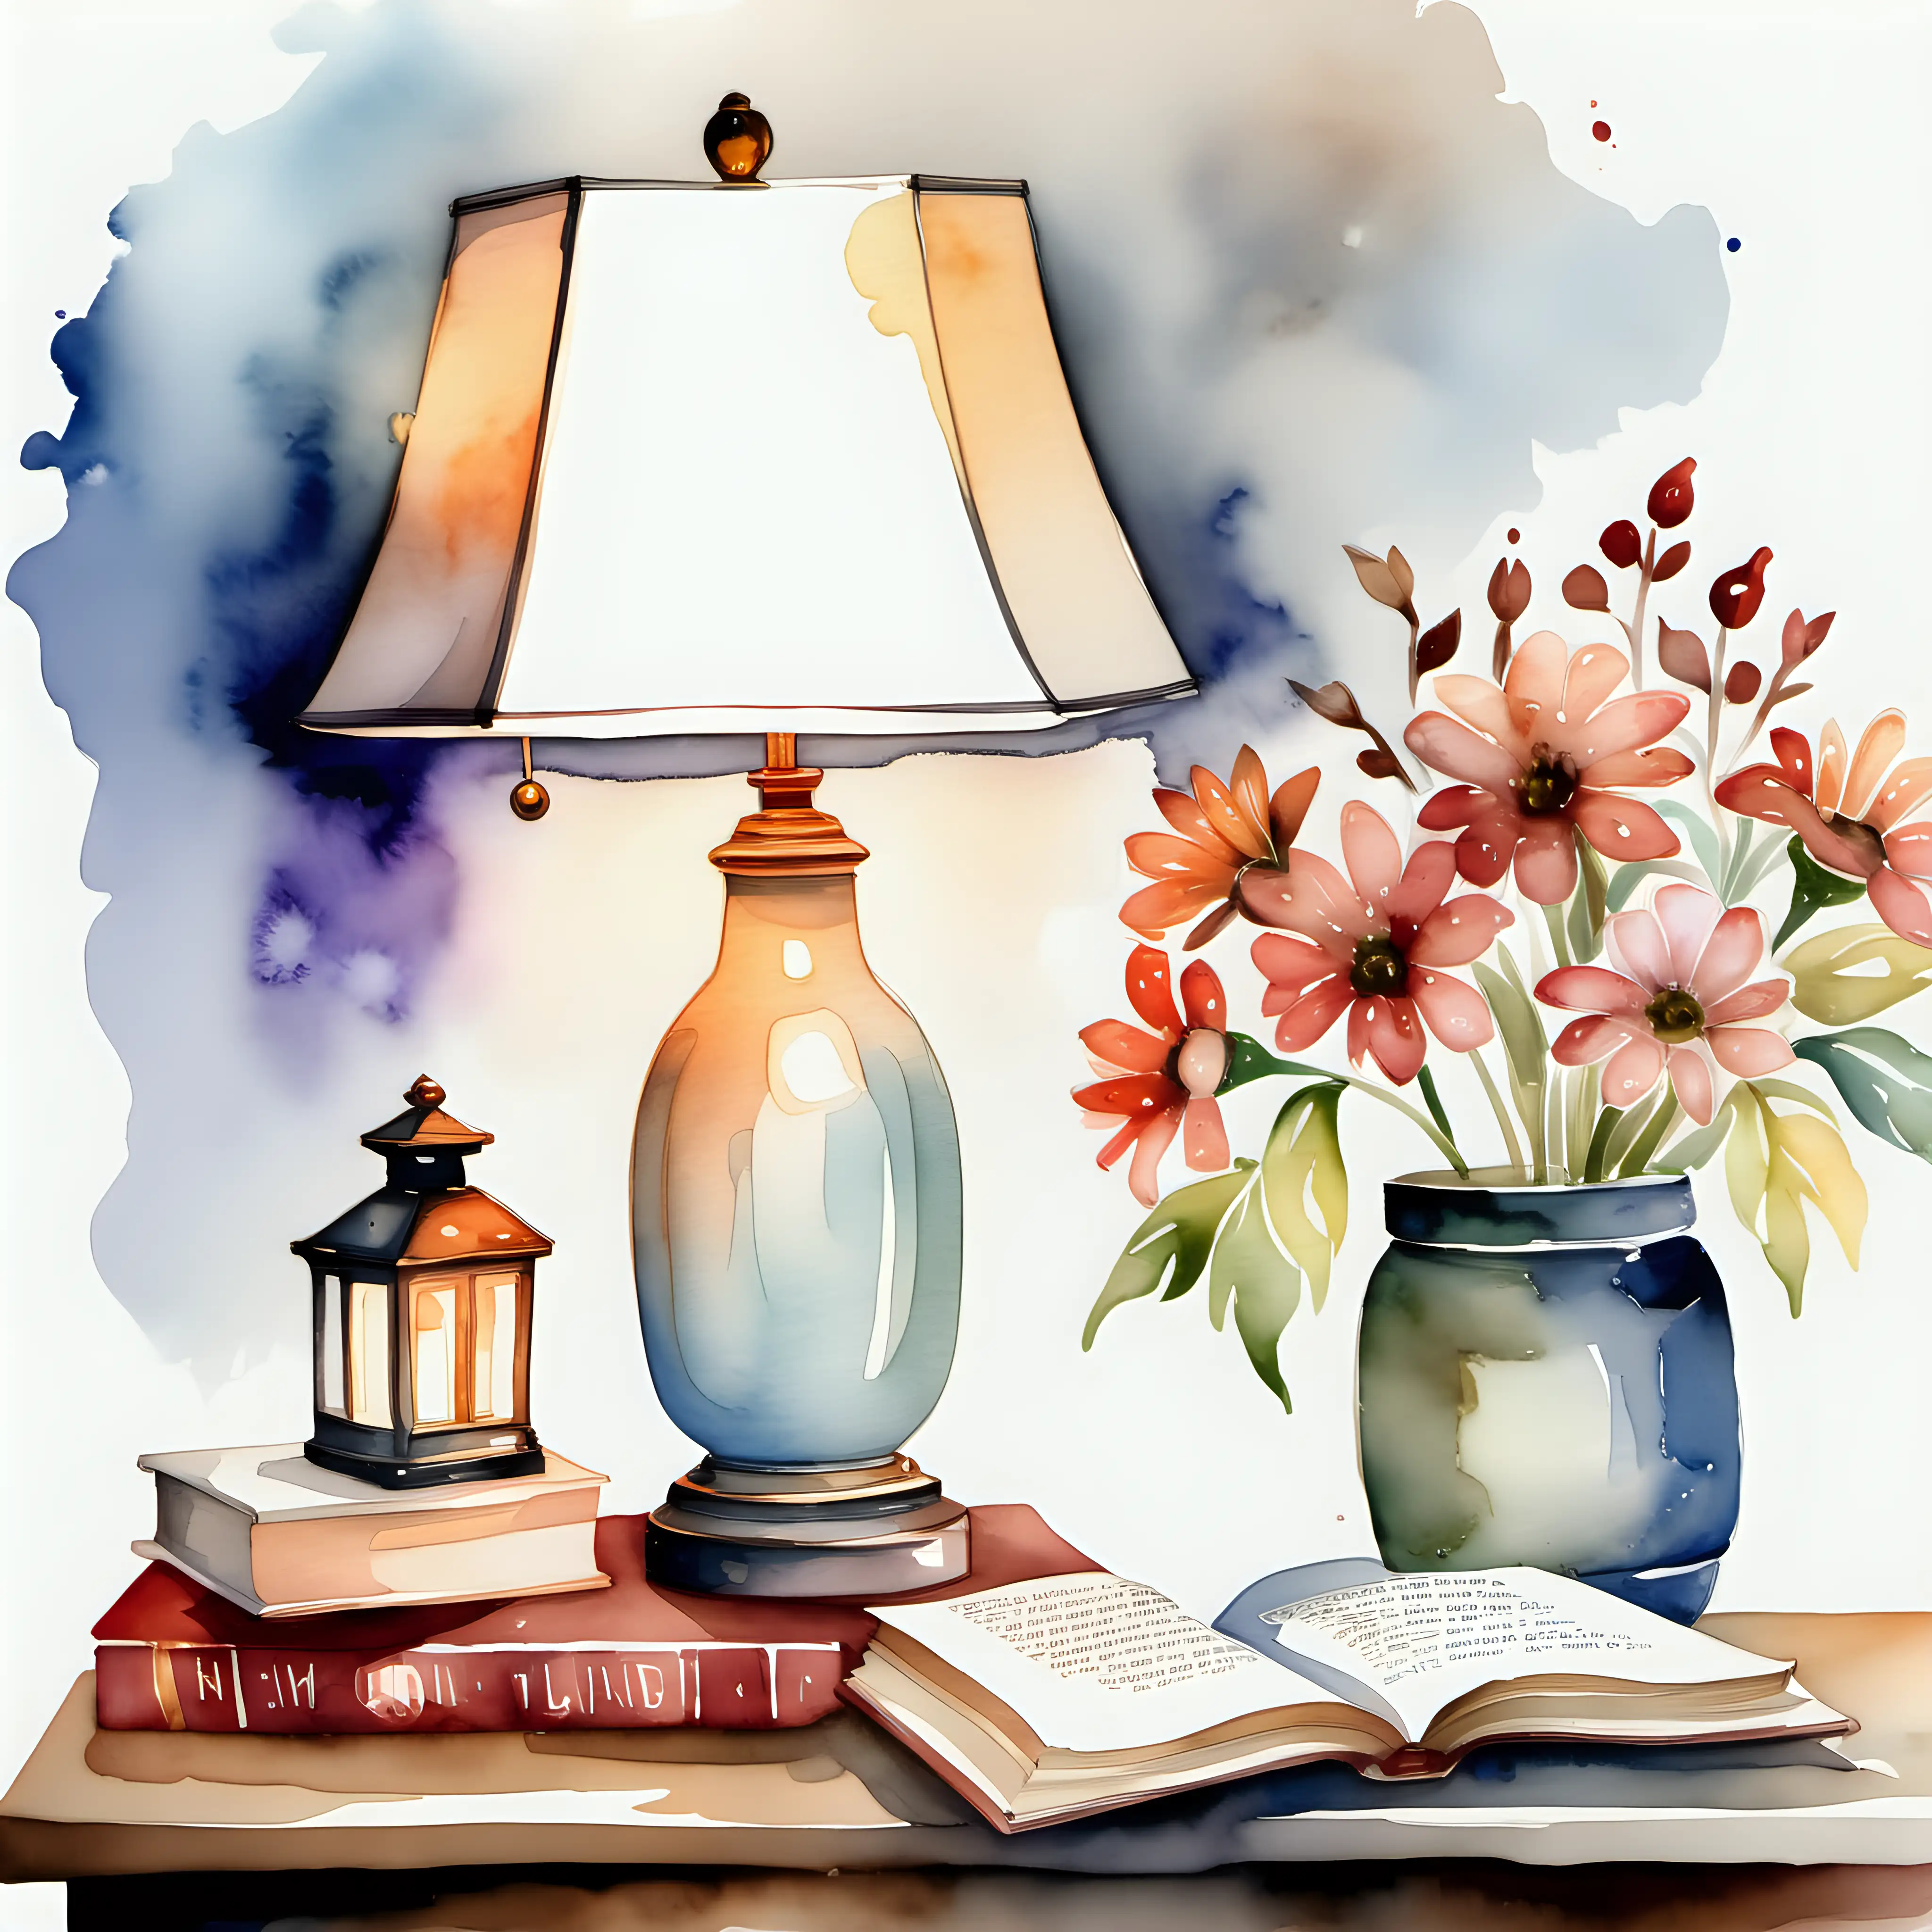 table lamp, flowers, and books
in watercolor